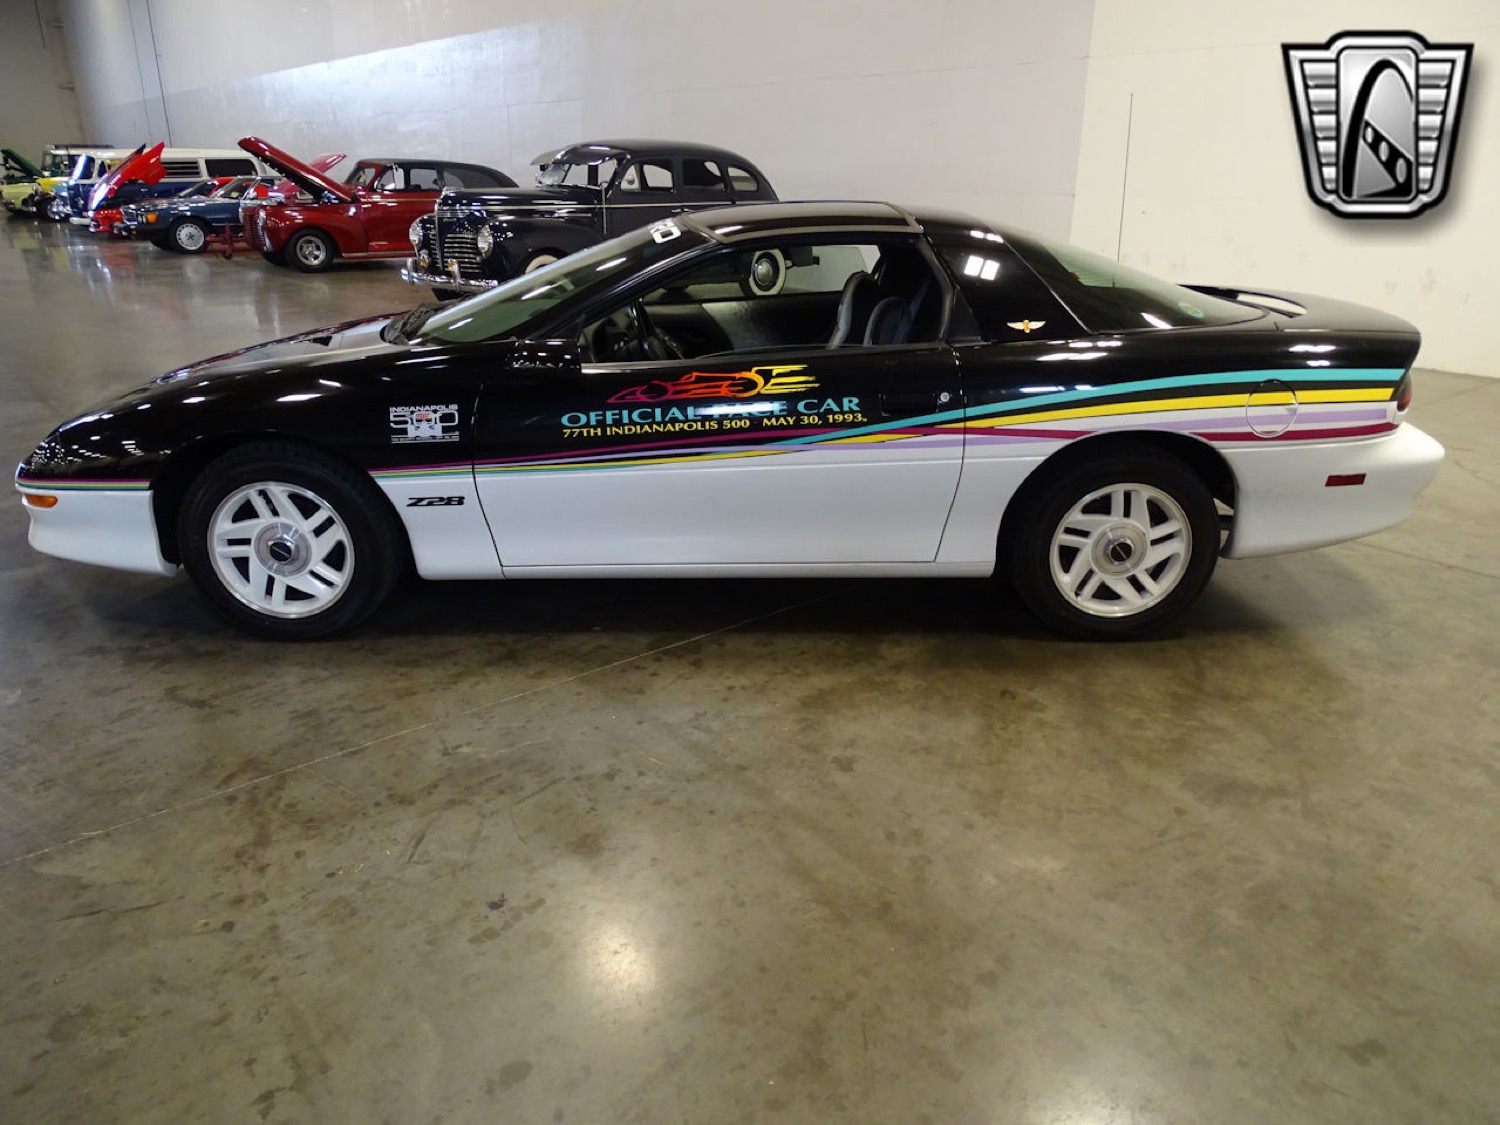 1993 Chevrolet Camaro Indy Pace Car For Sale Gm Authority